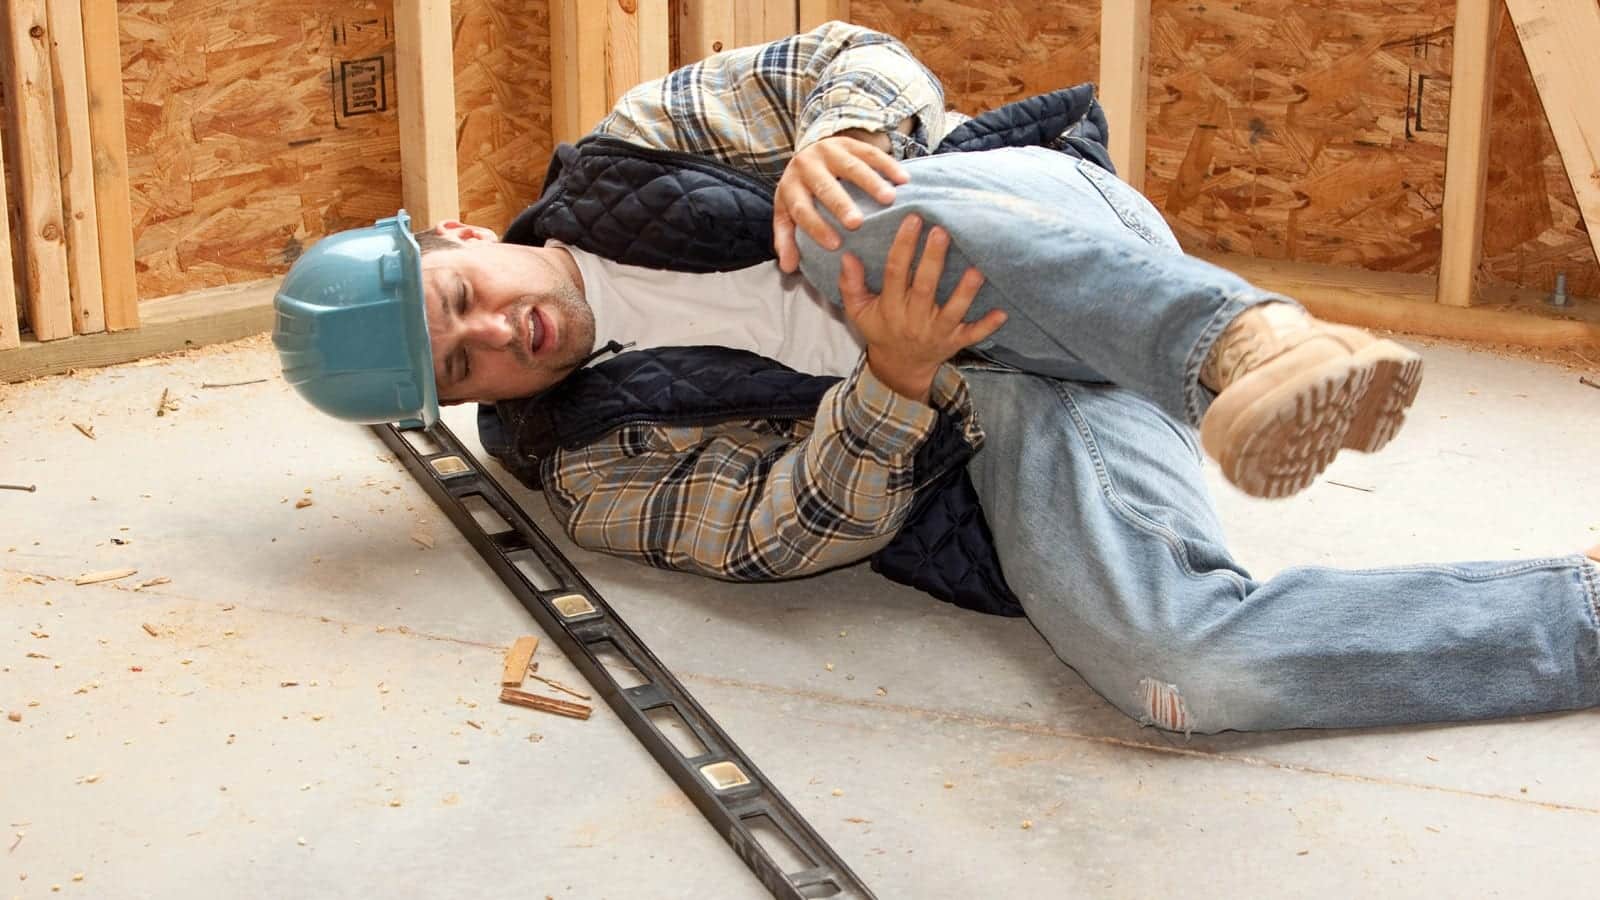 Construction worker falling on the job.